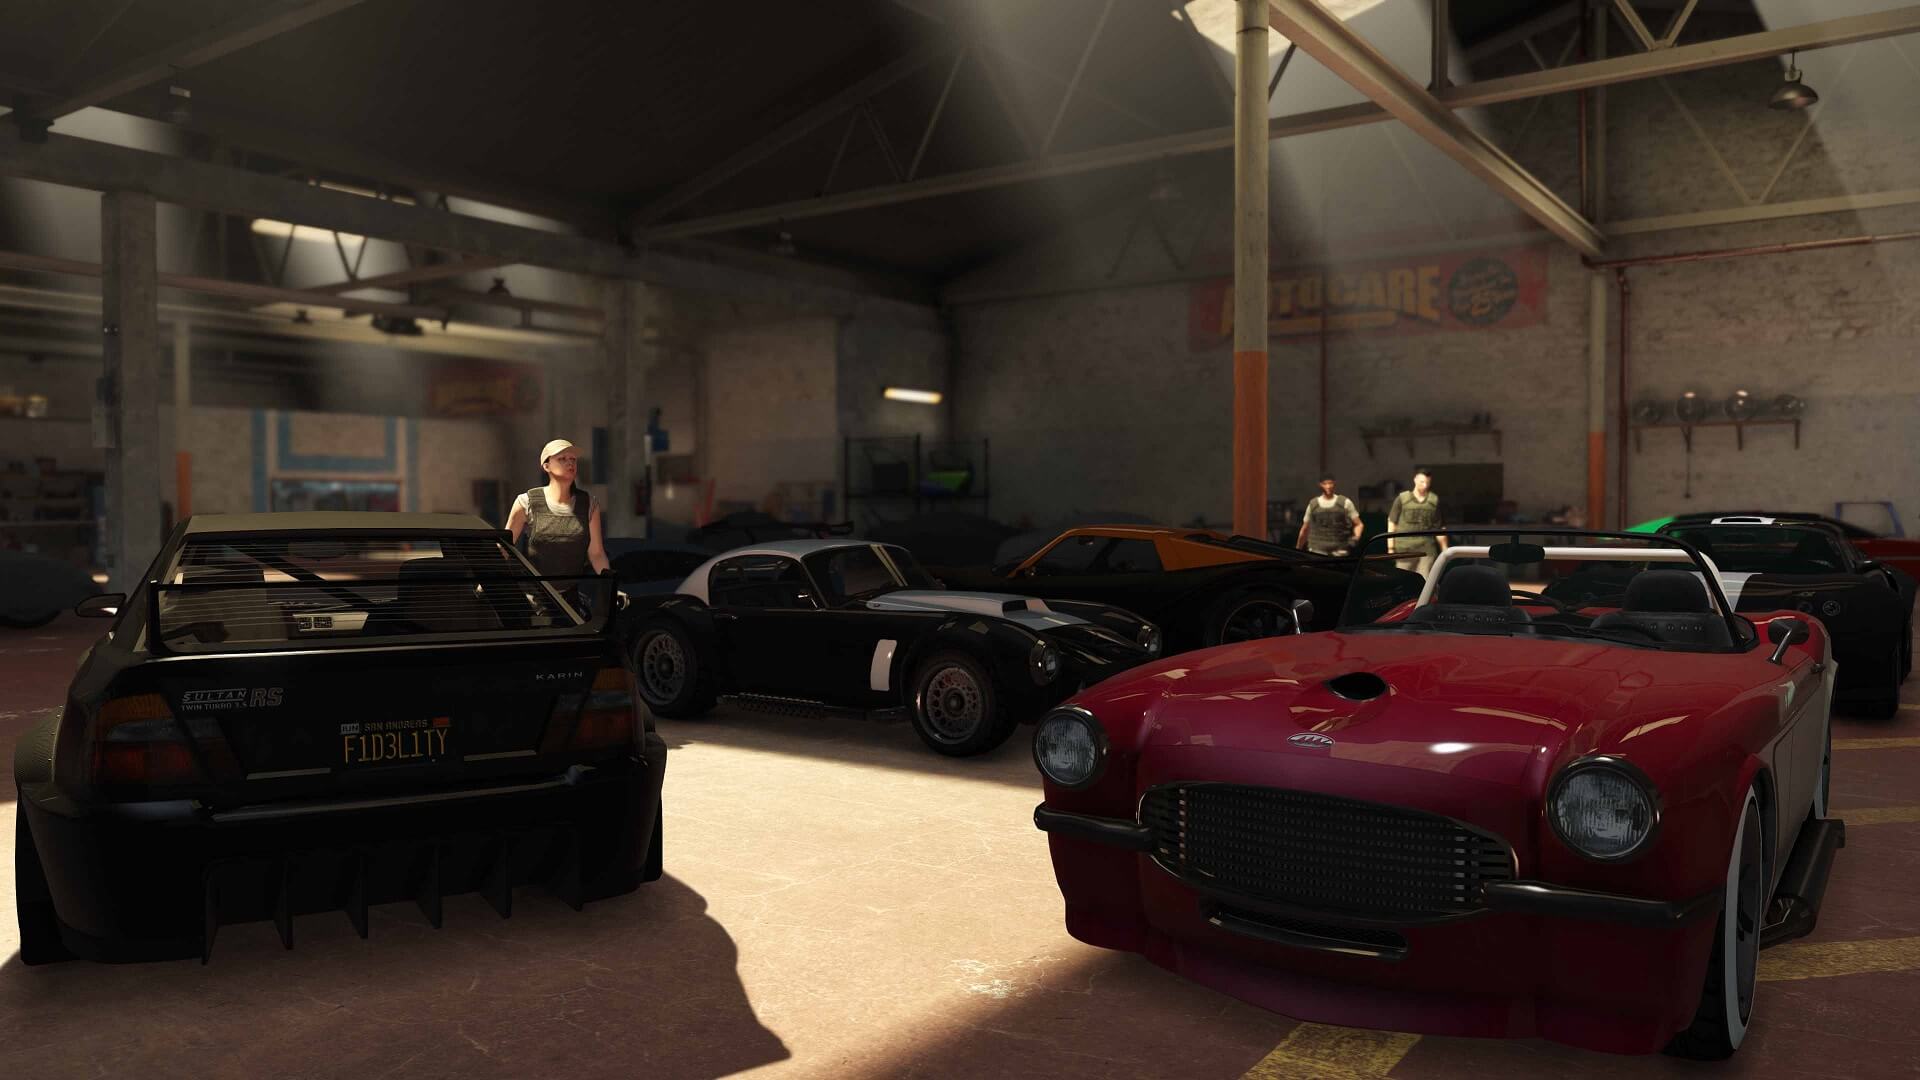 A group of players stood around with their cars in GTA Online, which could inform the content delivery of Grand Theft Auto 6